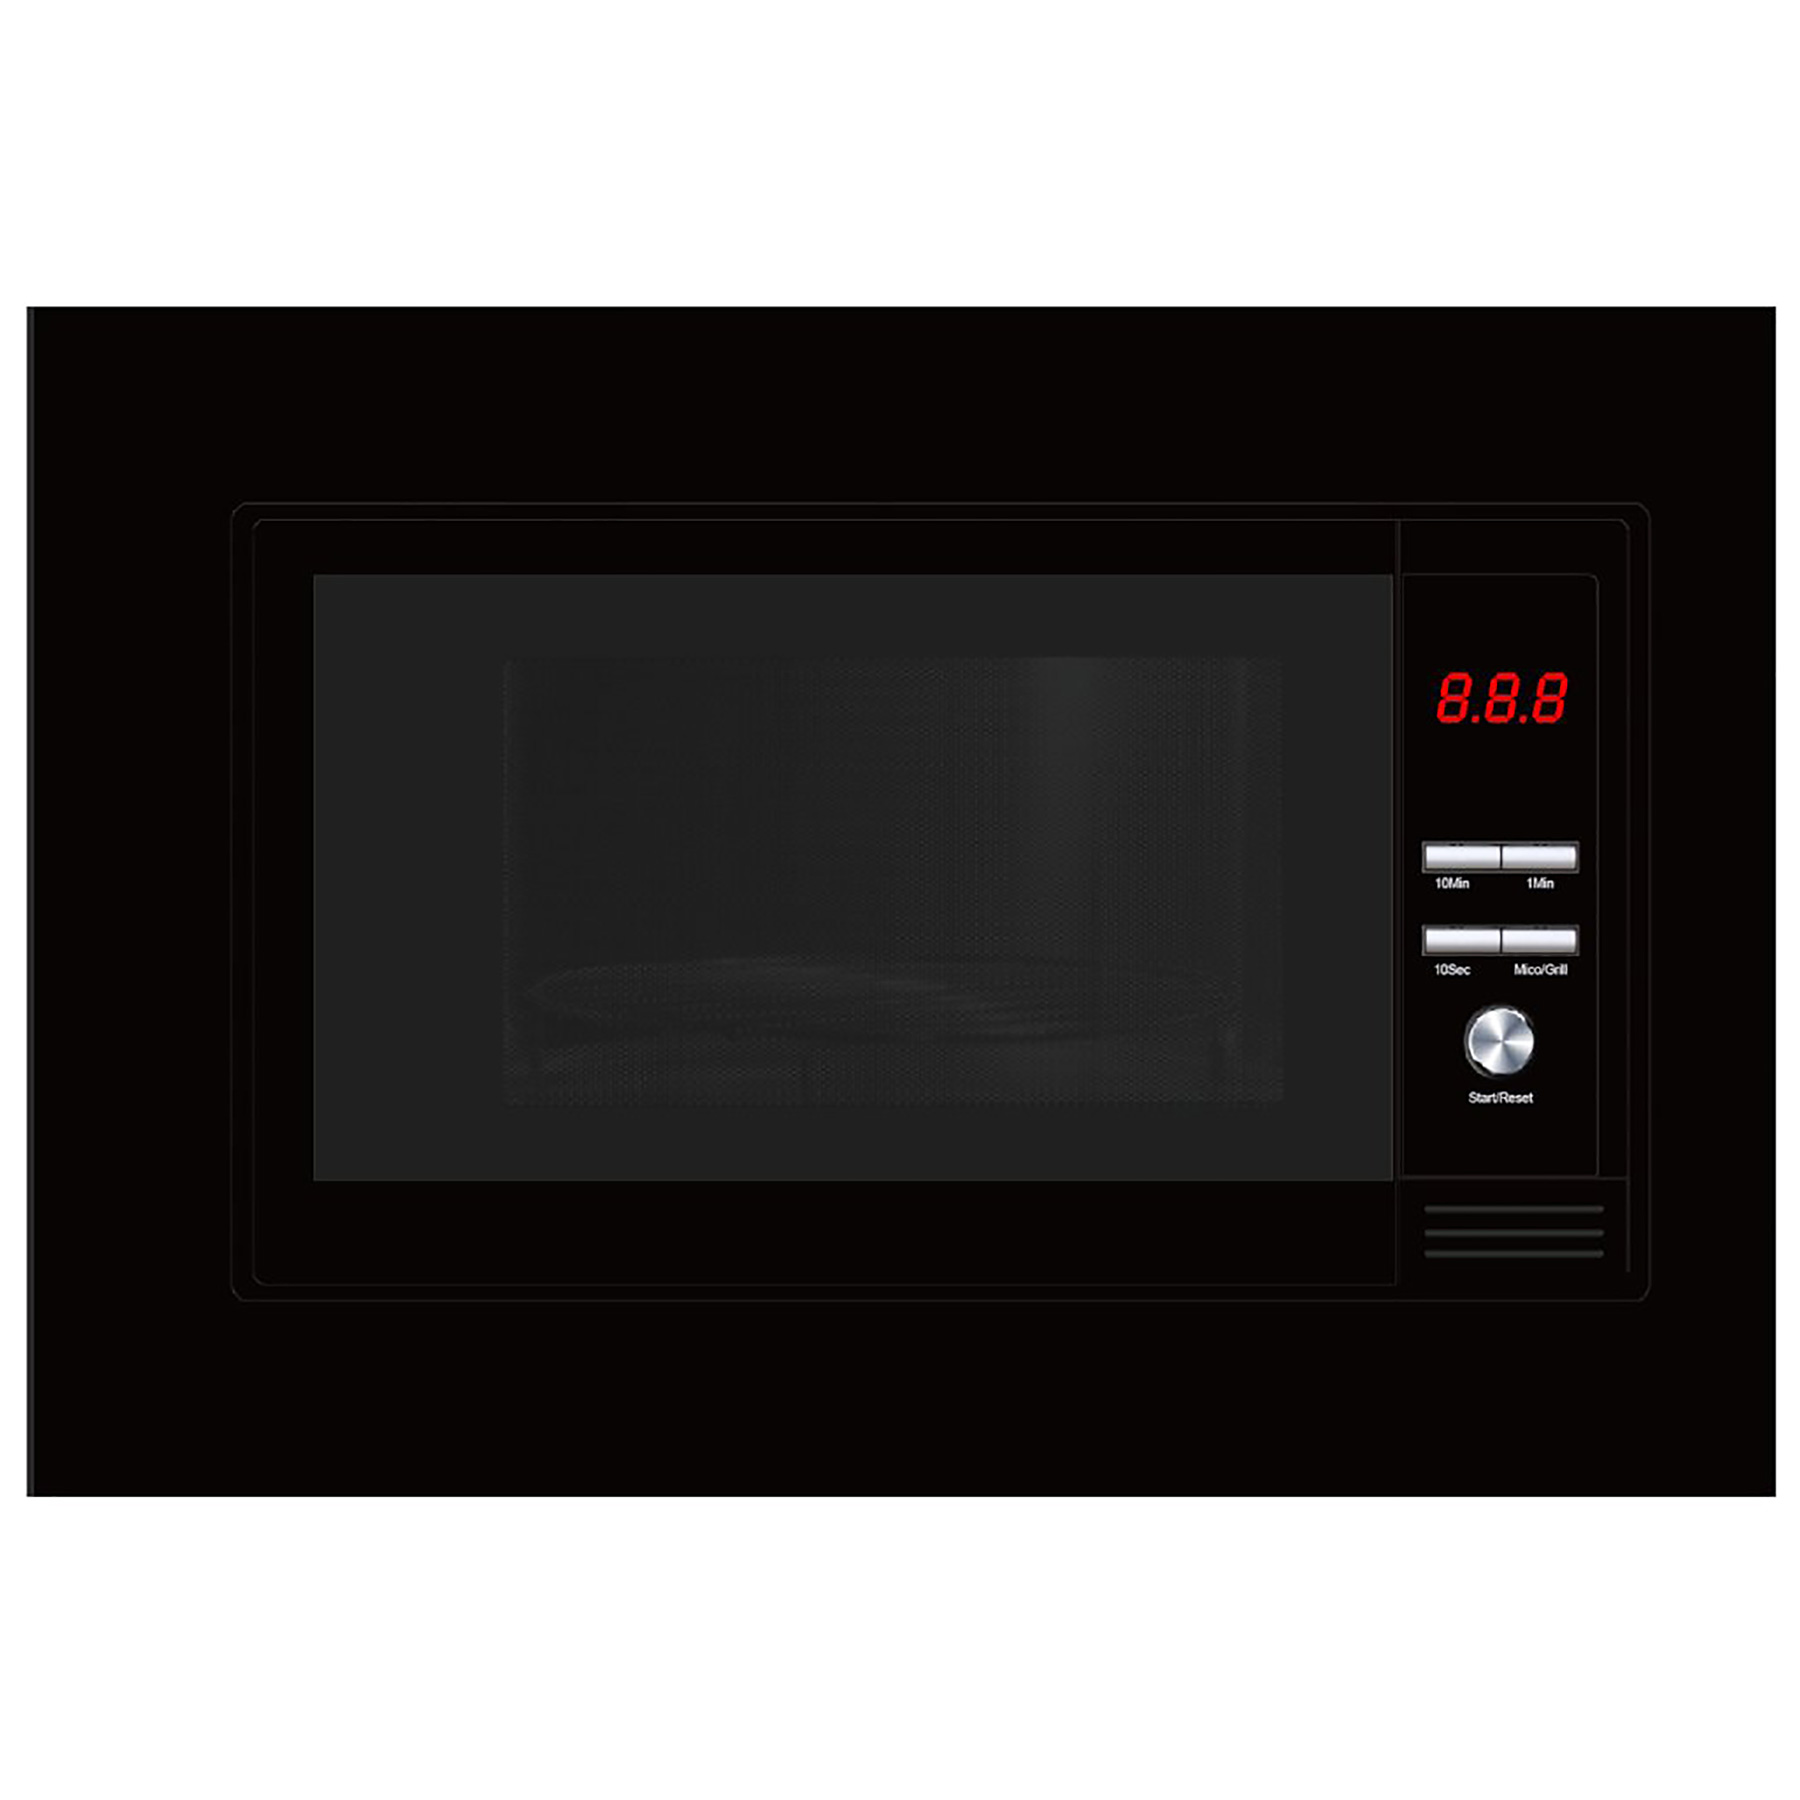 Culina UBMICROL20BK Built In Microwave Oven with Grill in Black 700W 2